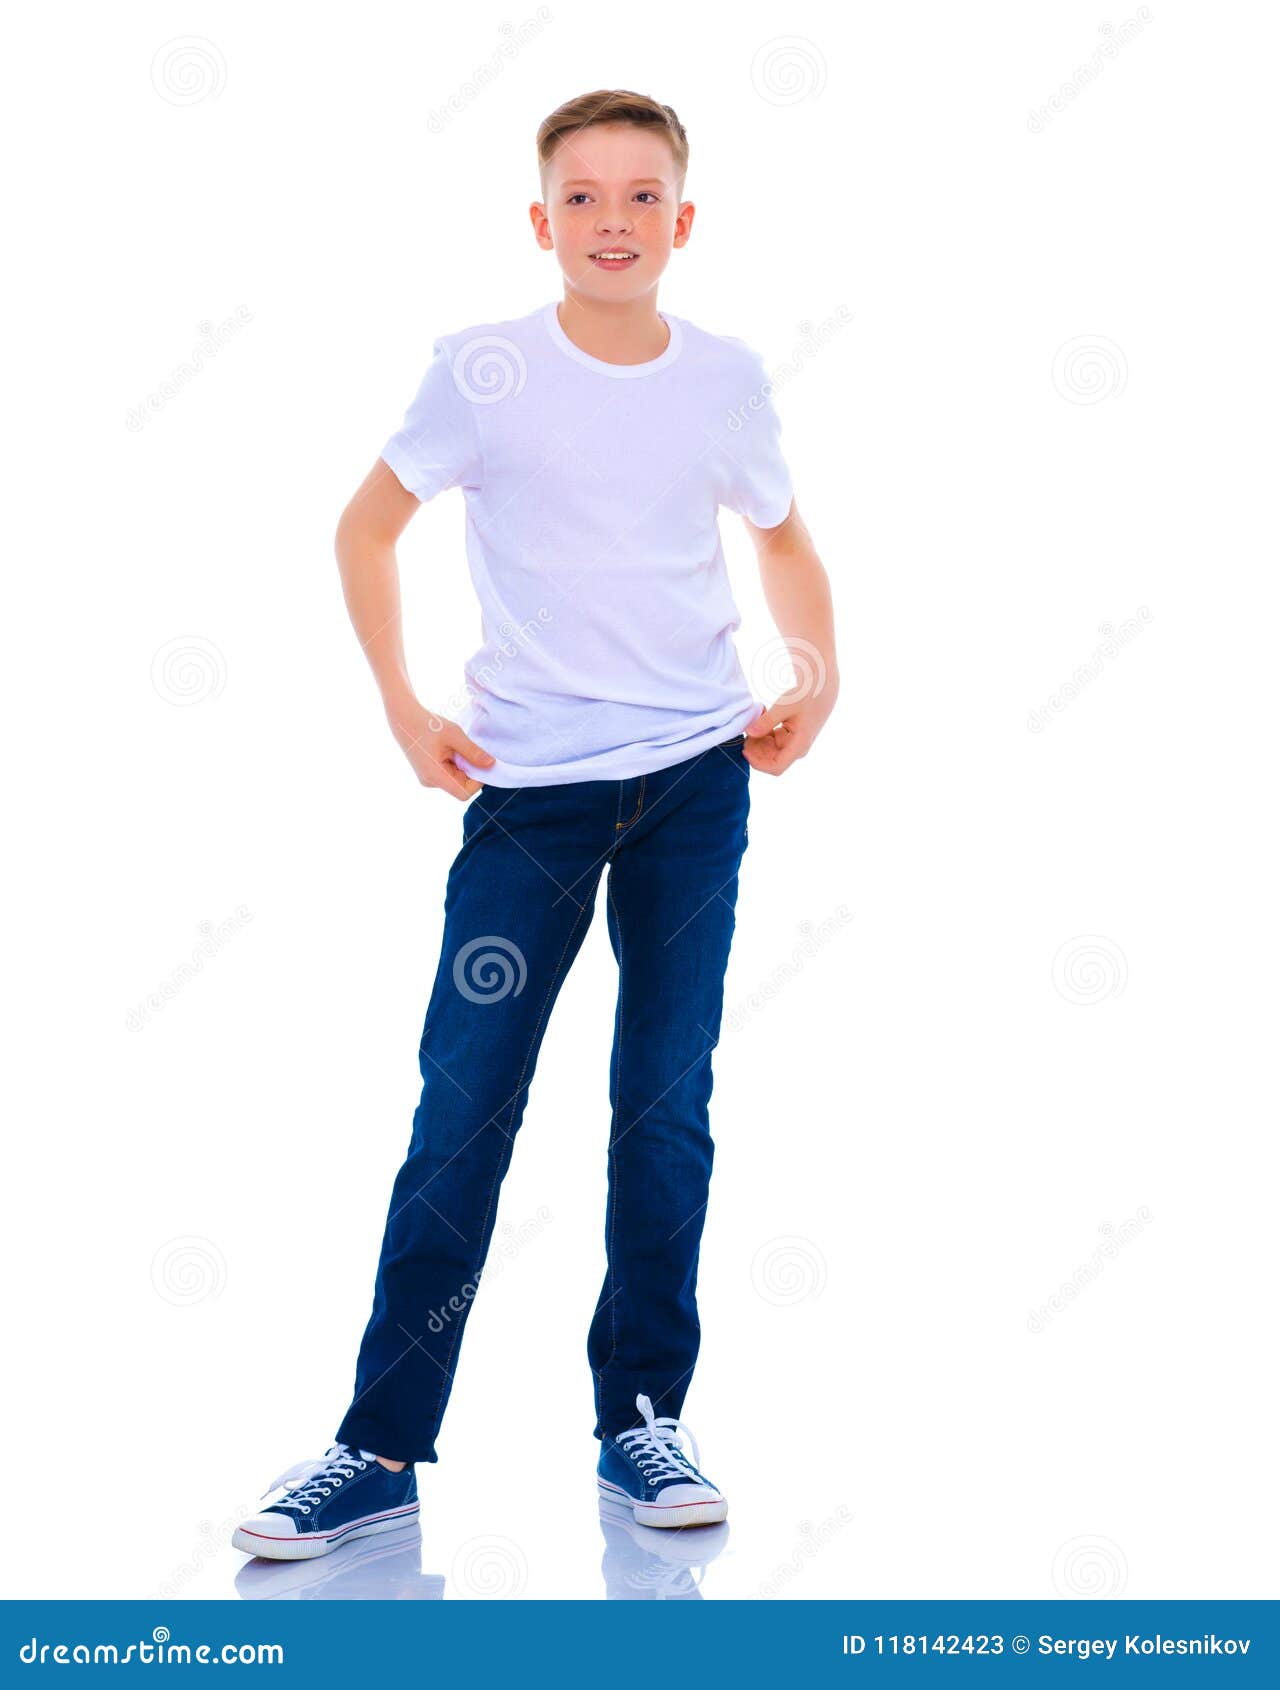 The Little Boy is Thinking. Stock Image - Image of happy, portrait ...